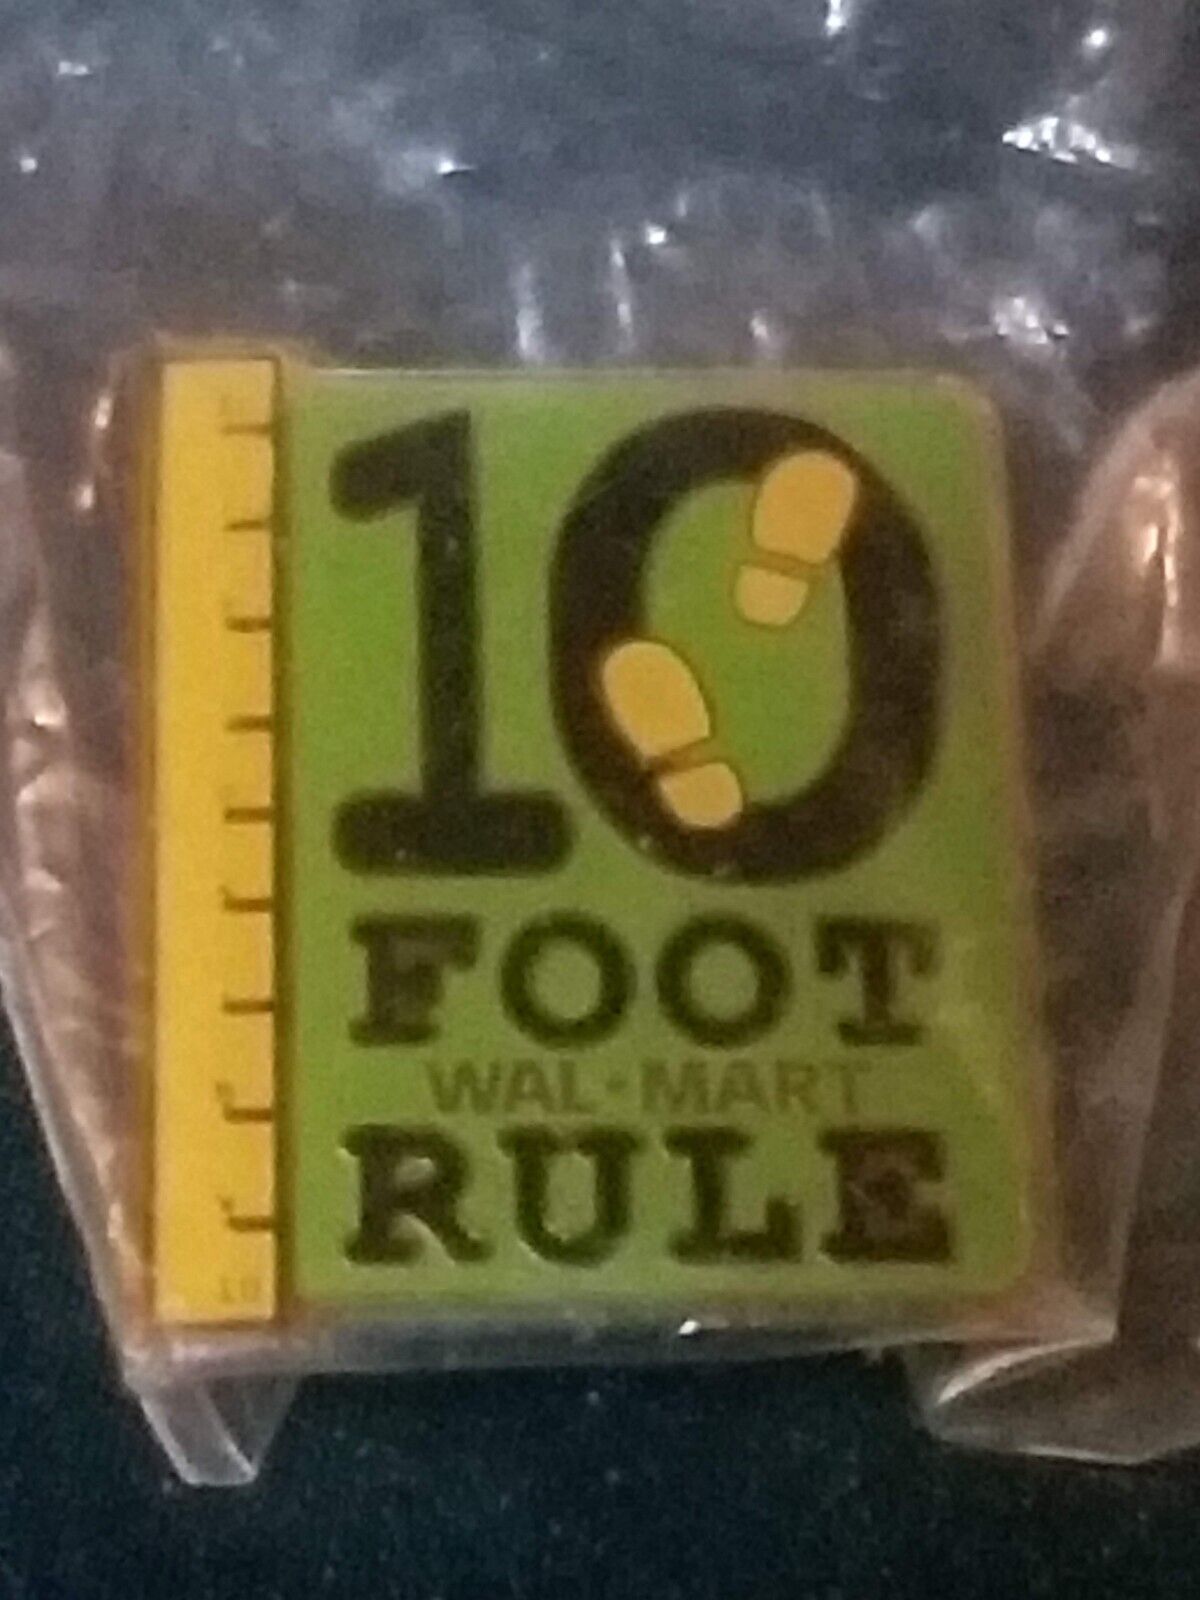 Walmart Limited Collectible 10 Foot Rule Pin *RETIRED PIN*